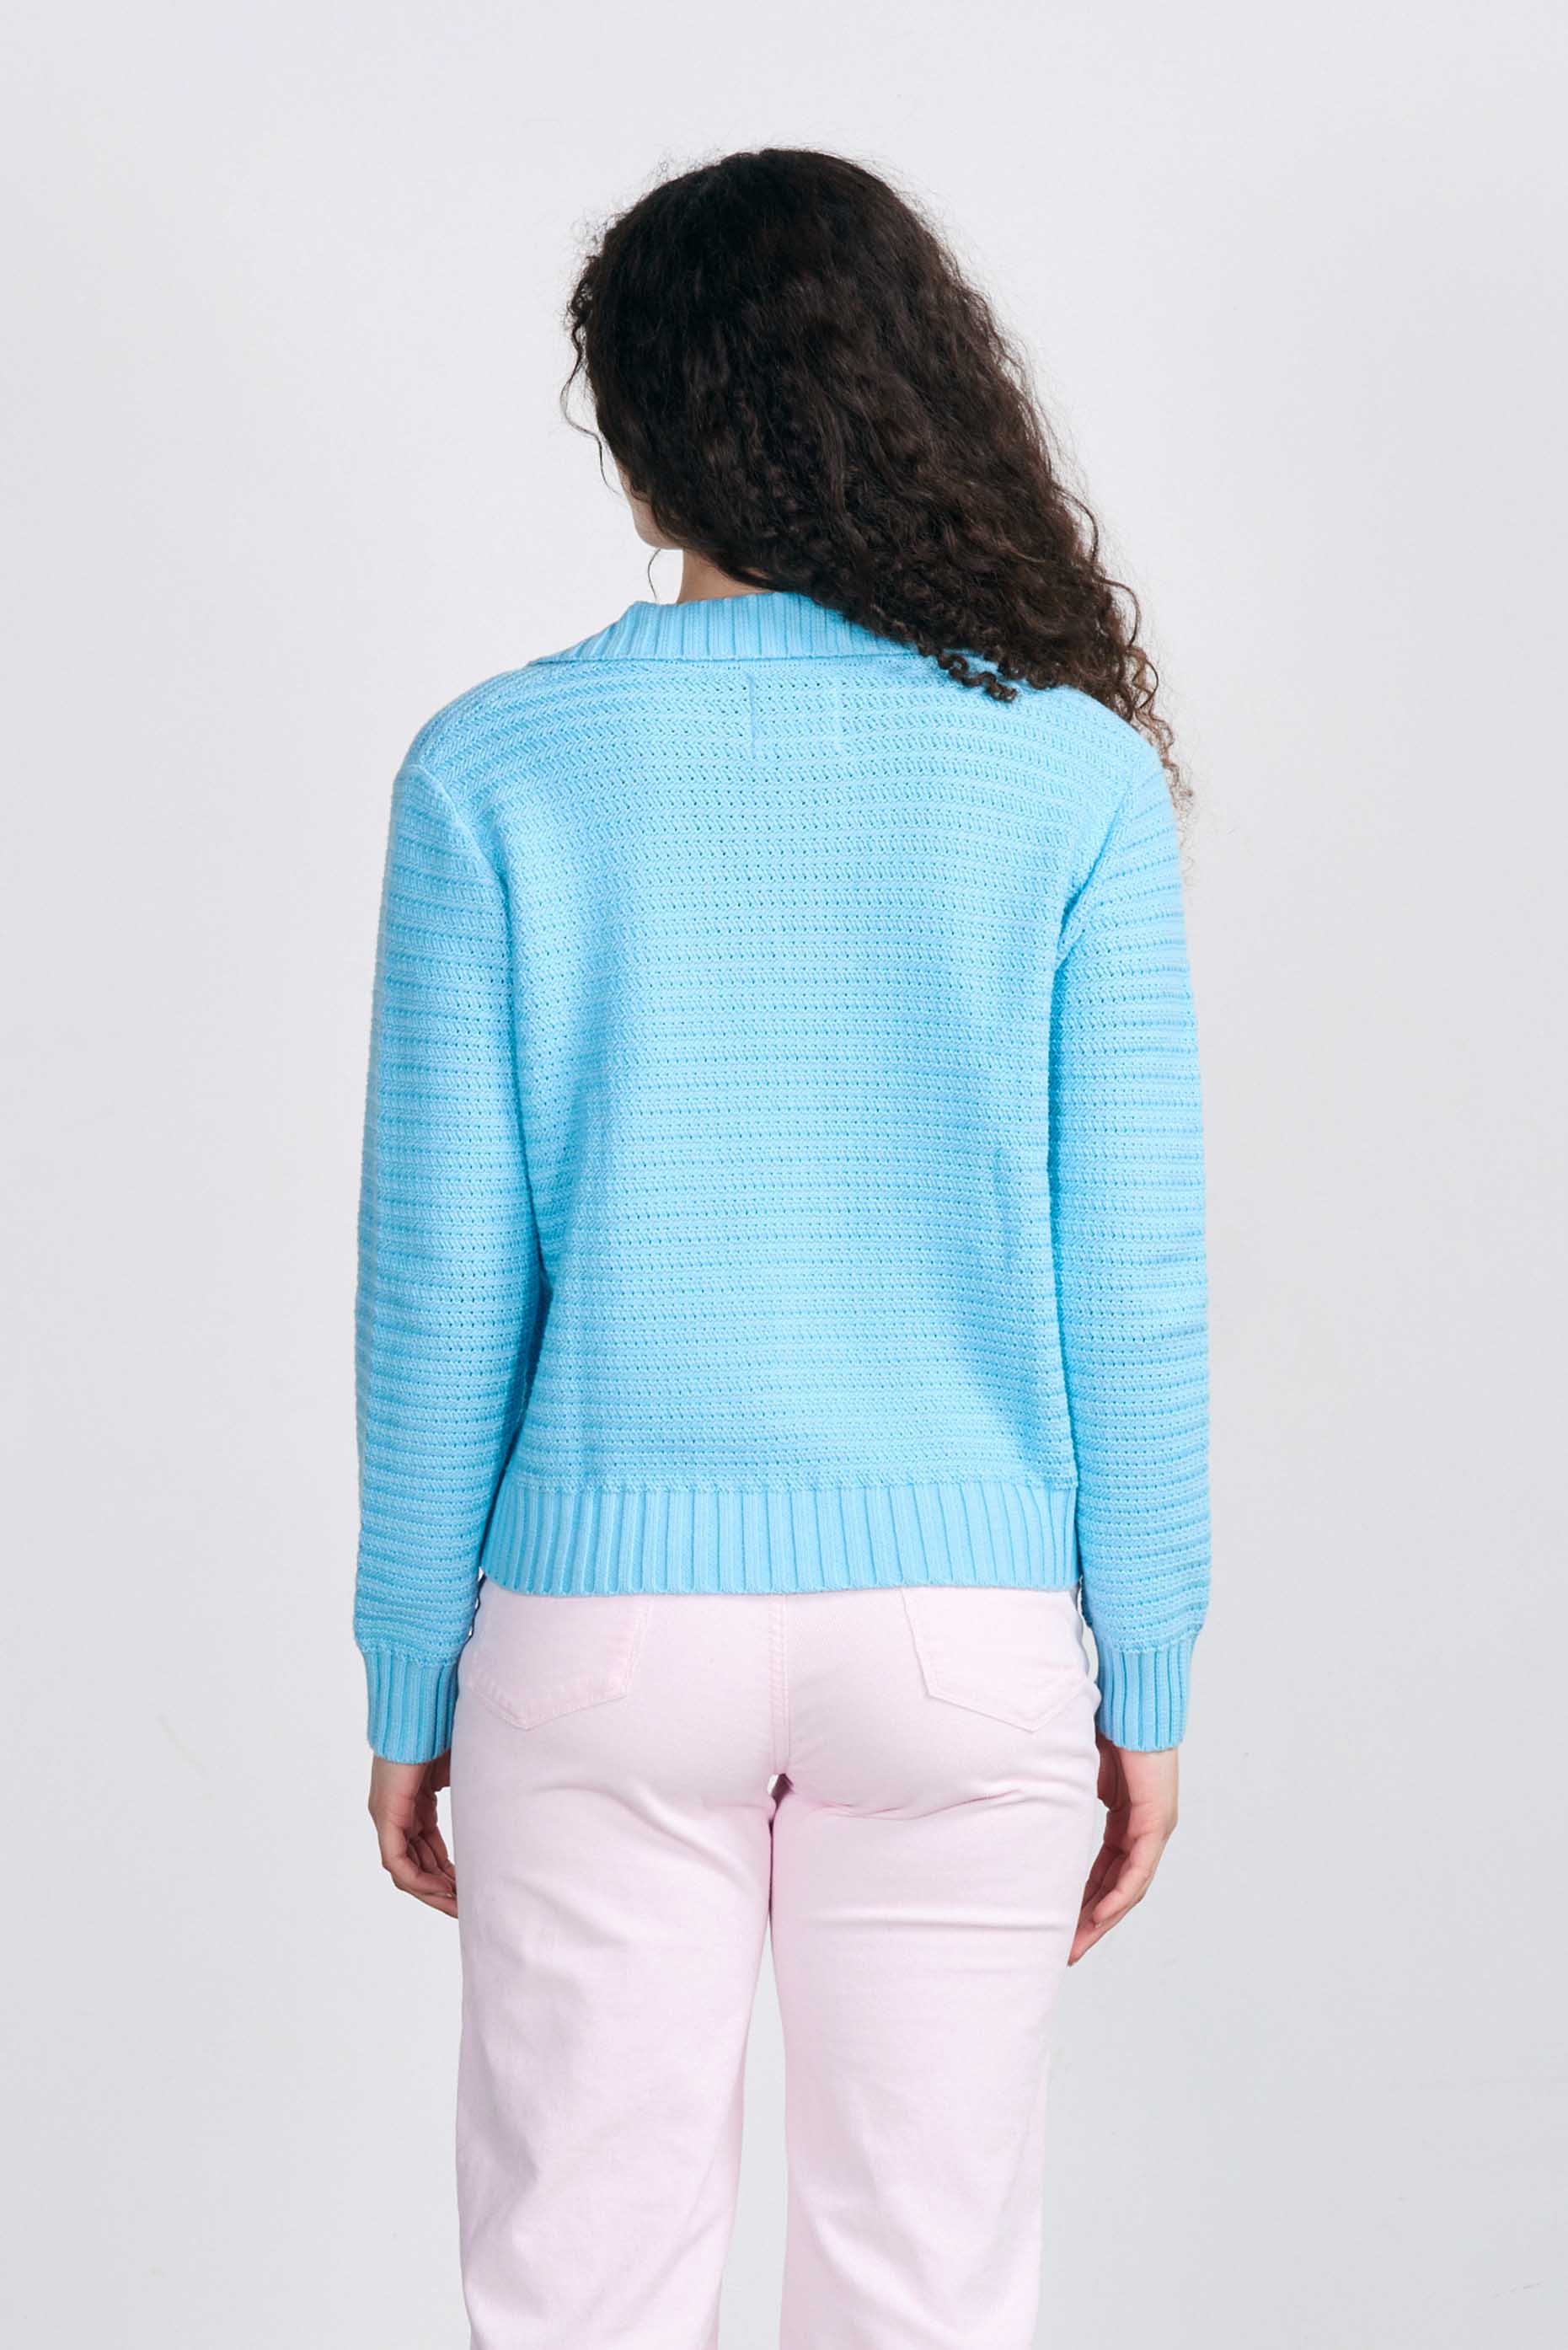 Brown haired female model wearing Jumper1234 Opal blue cotton jumper with a collar in a fabulous all over herringbone stitch facing away from the camera